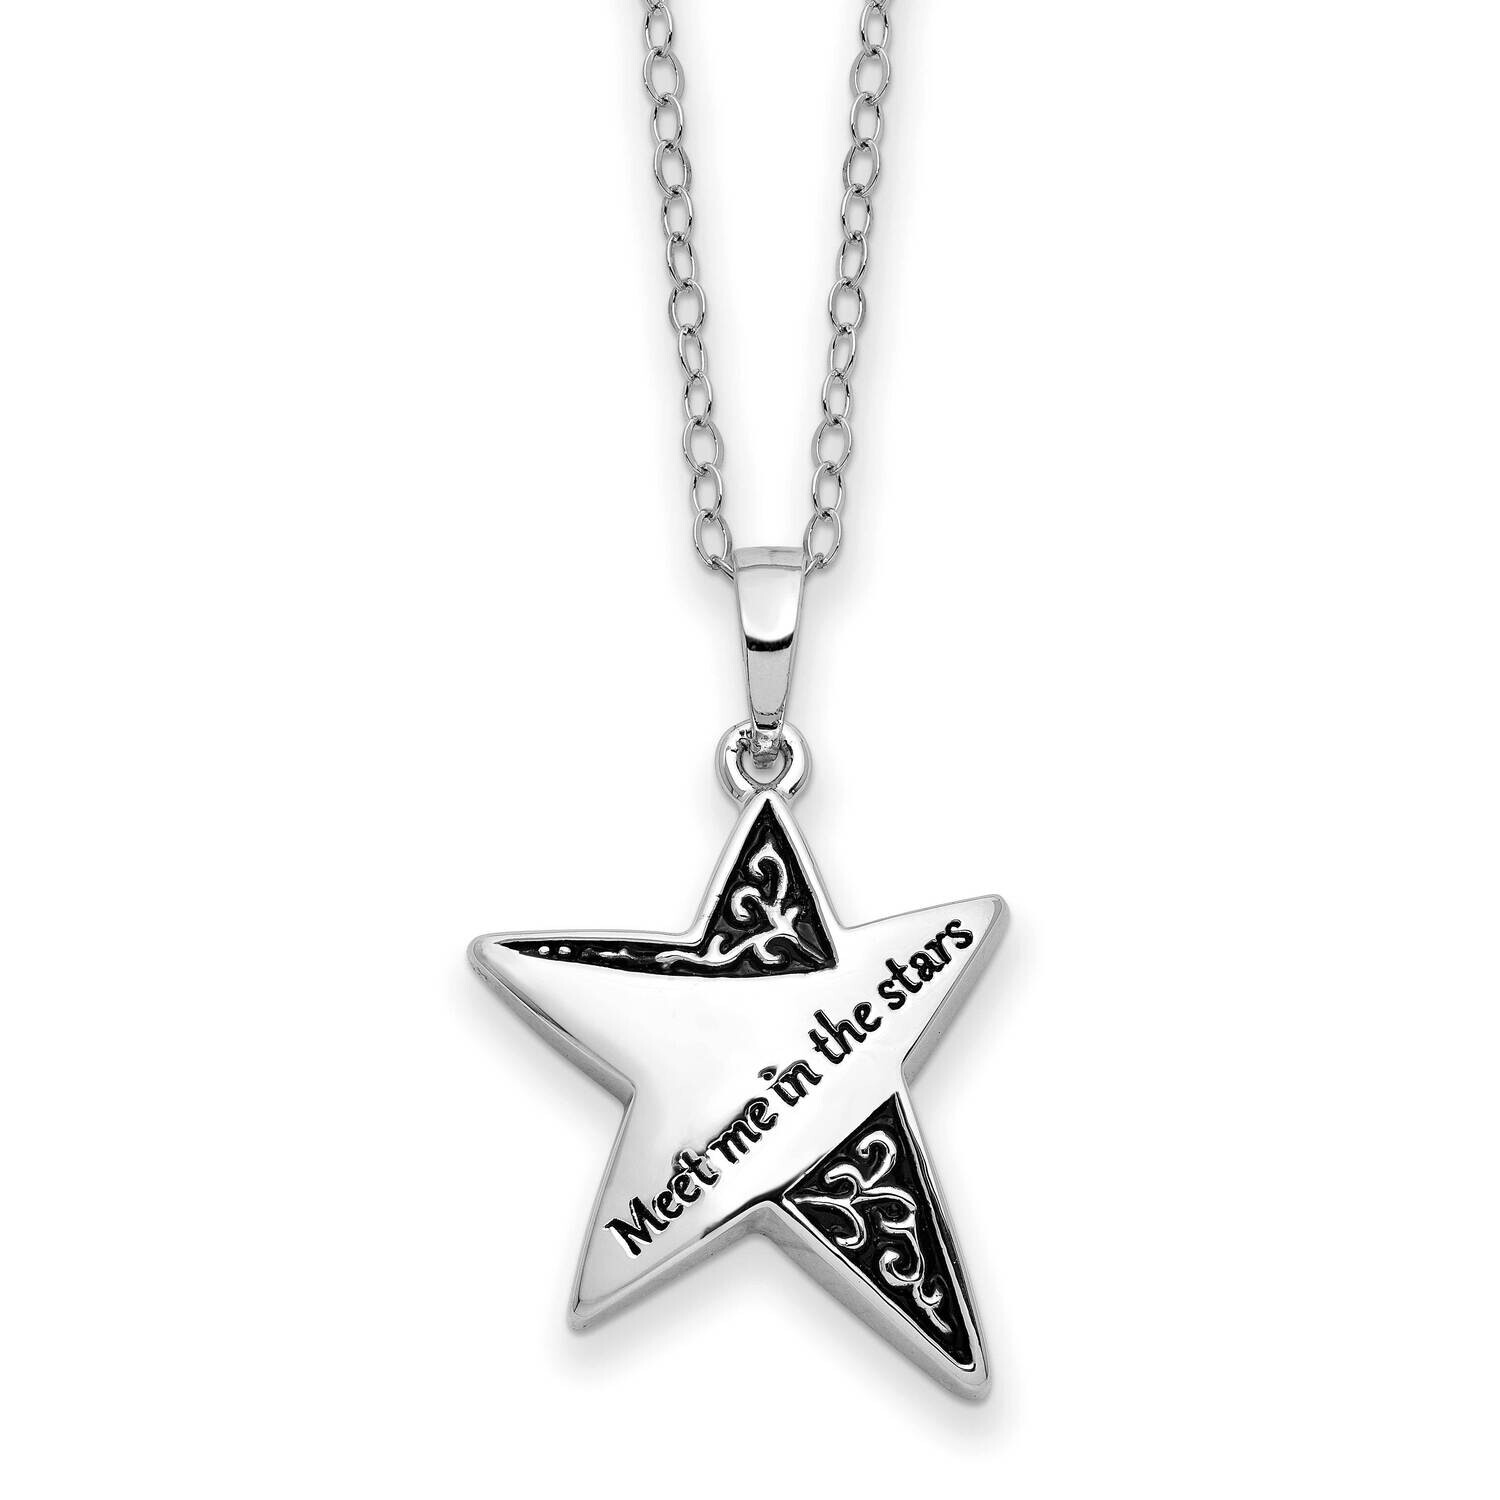 Sentimental Expressions Antiqued Meet Me In The Stars 18 Inch Ash Holder Necklace Sterling Silver Rhodium-Plated QSX772